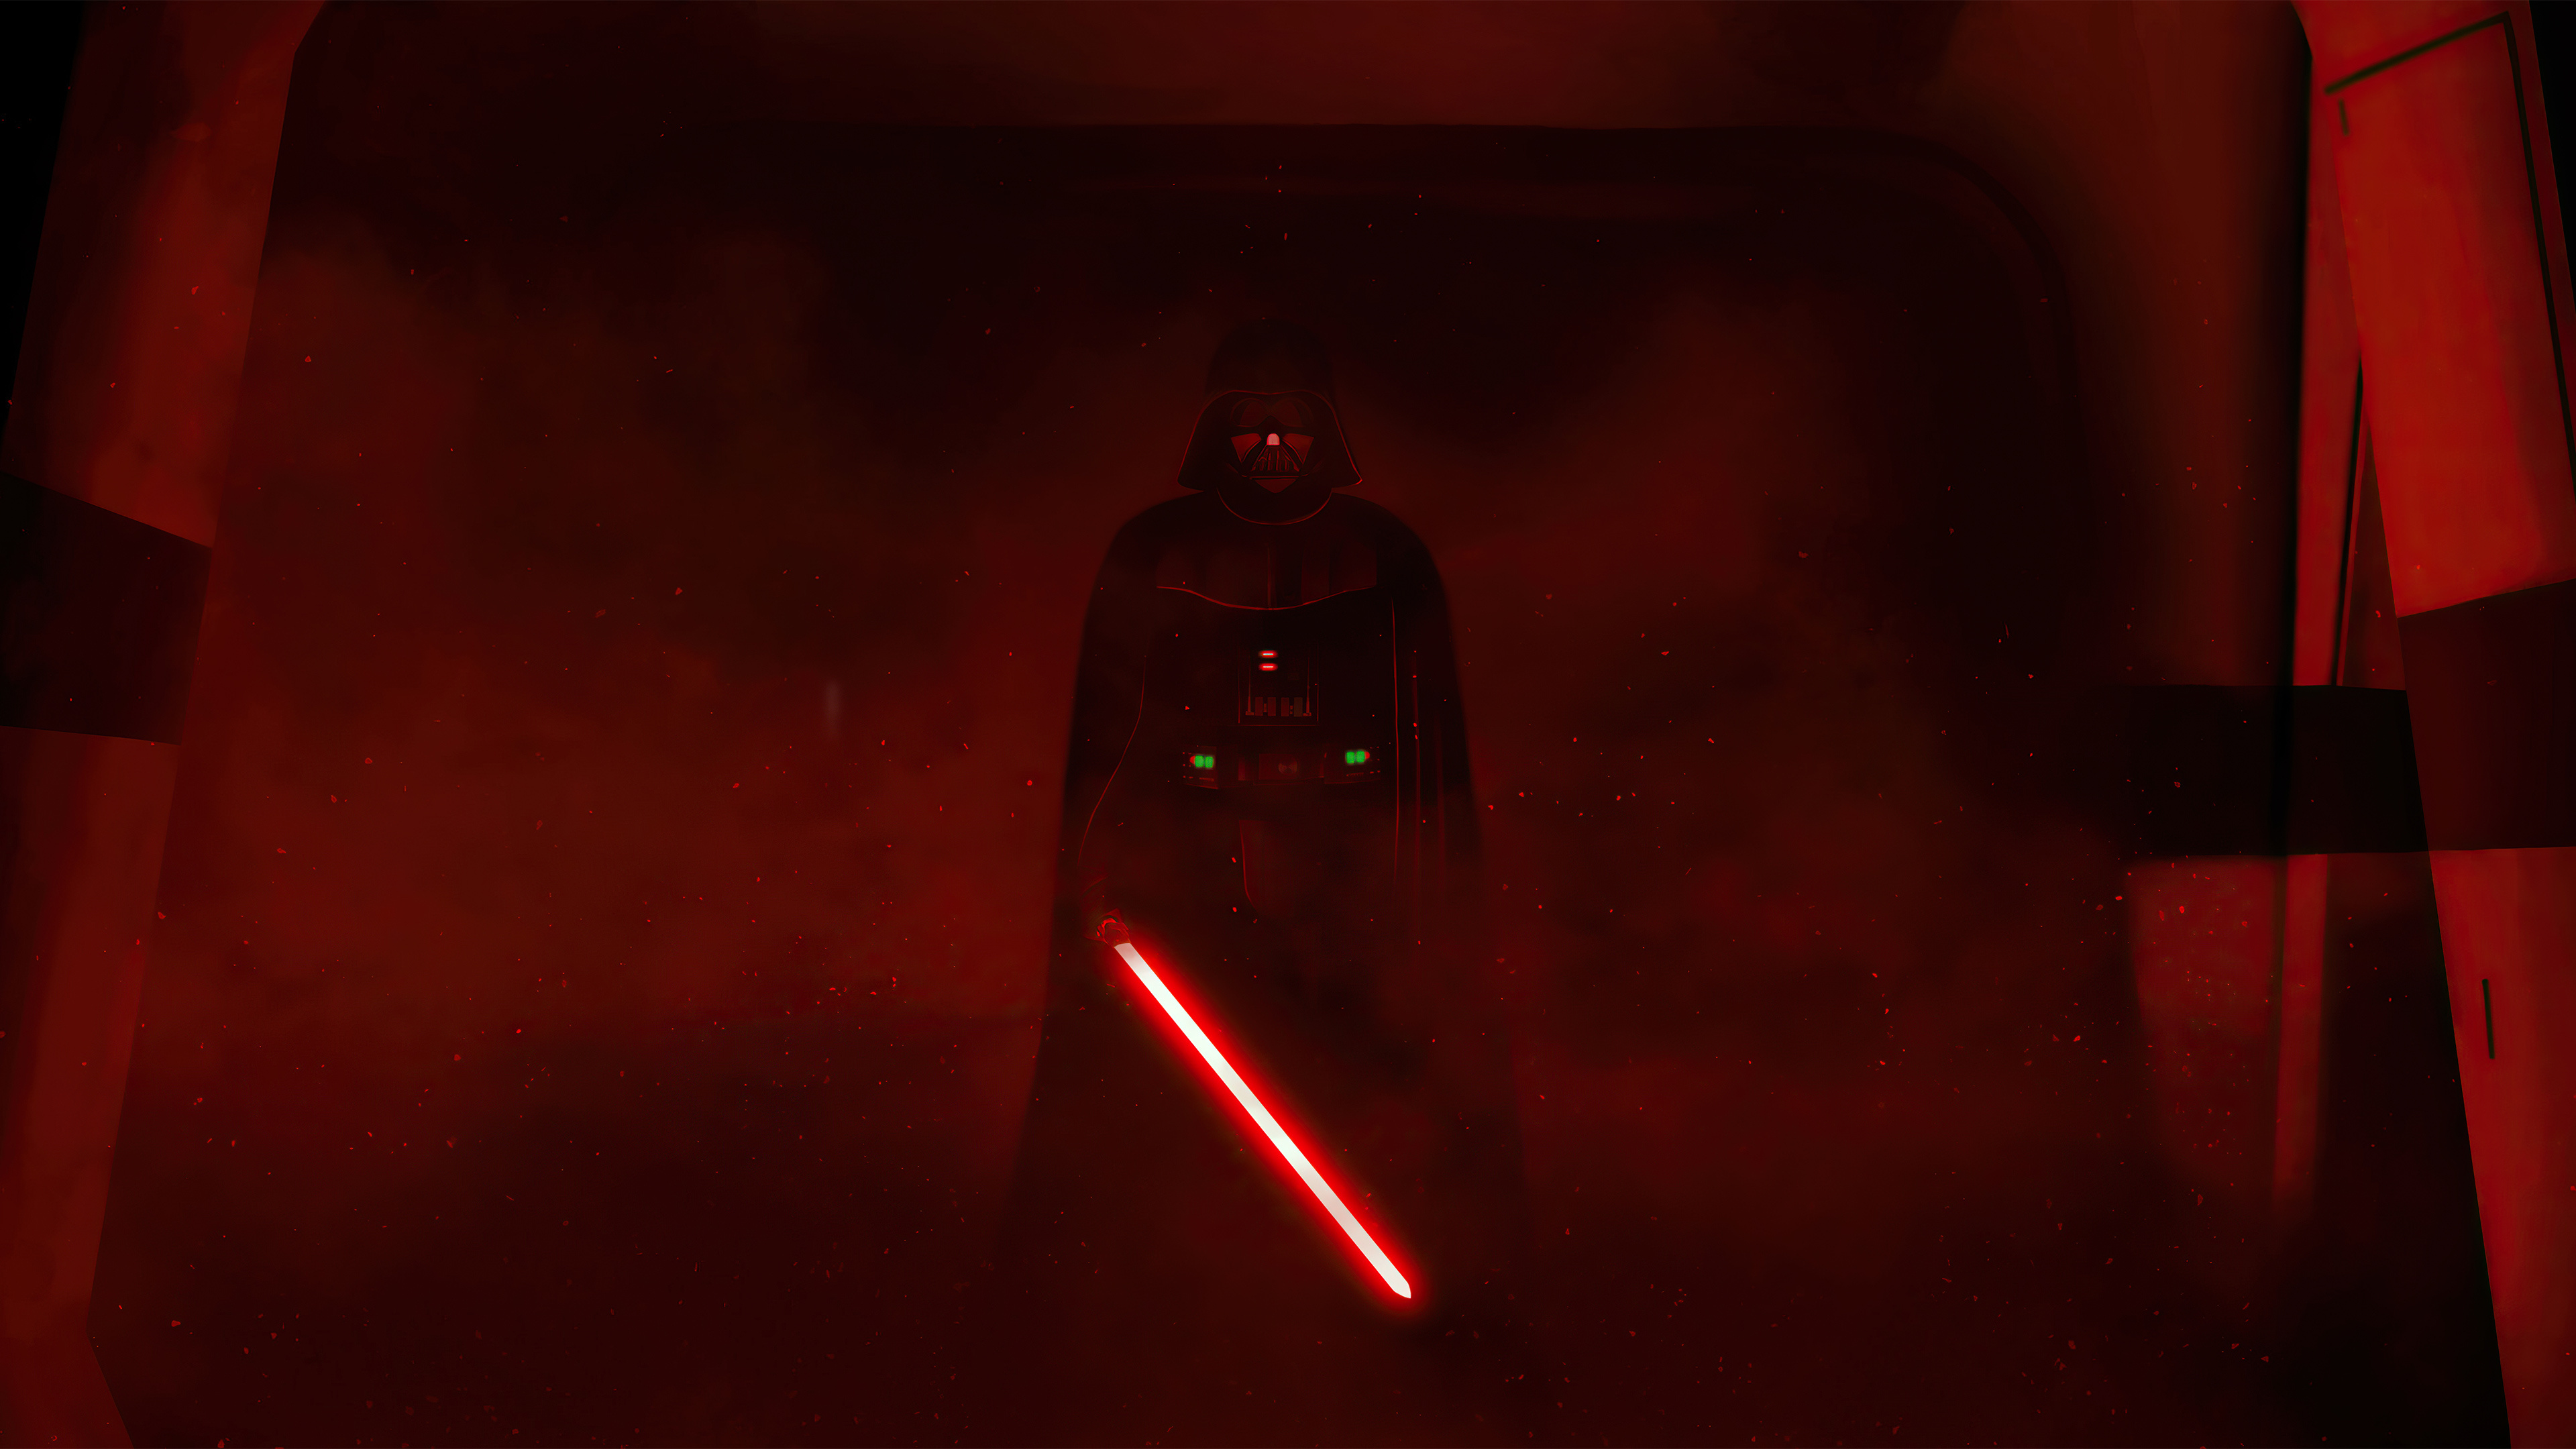 Darth Vader: Rogue One, Star Wars, One of the most iconic character designs of all time. 3840x2160 4K Wallpaper.